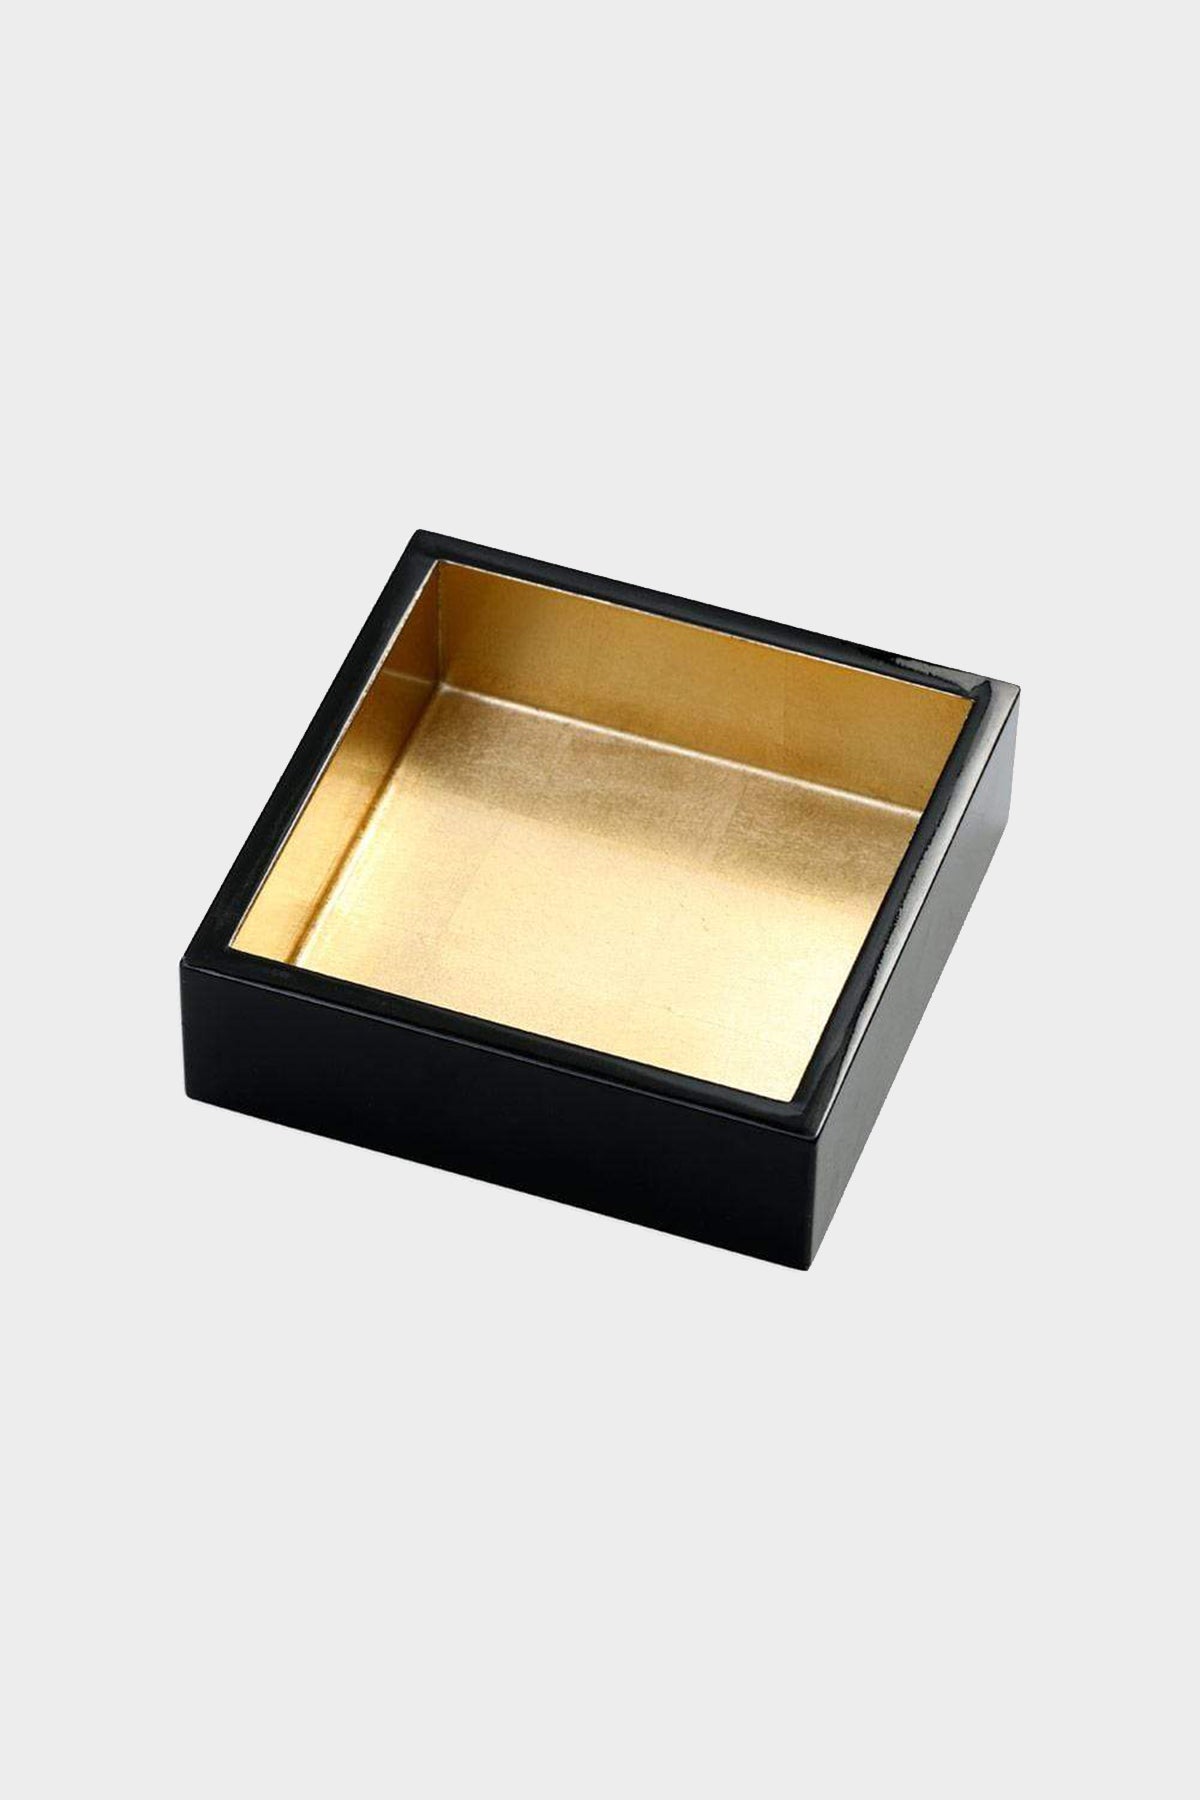 Lacquer Cocktail Napkin Holder in Black and Gold - shop-olivia.com